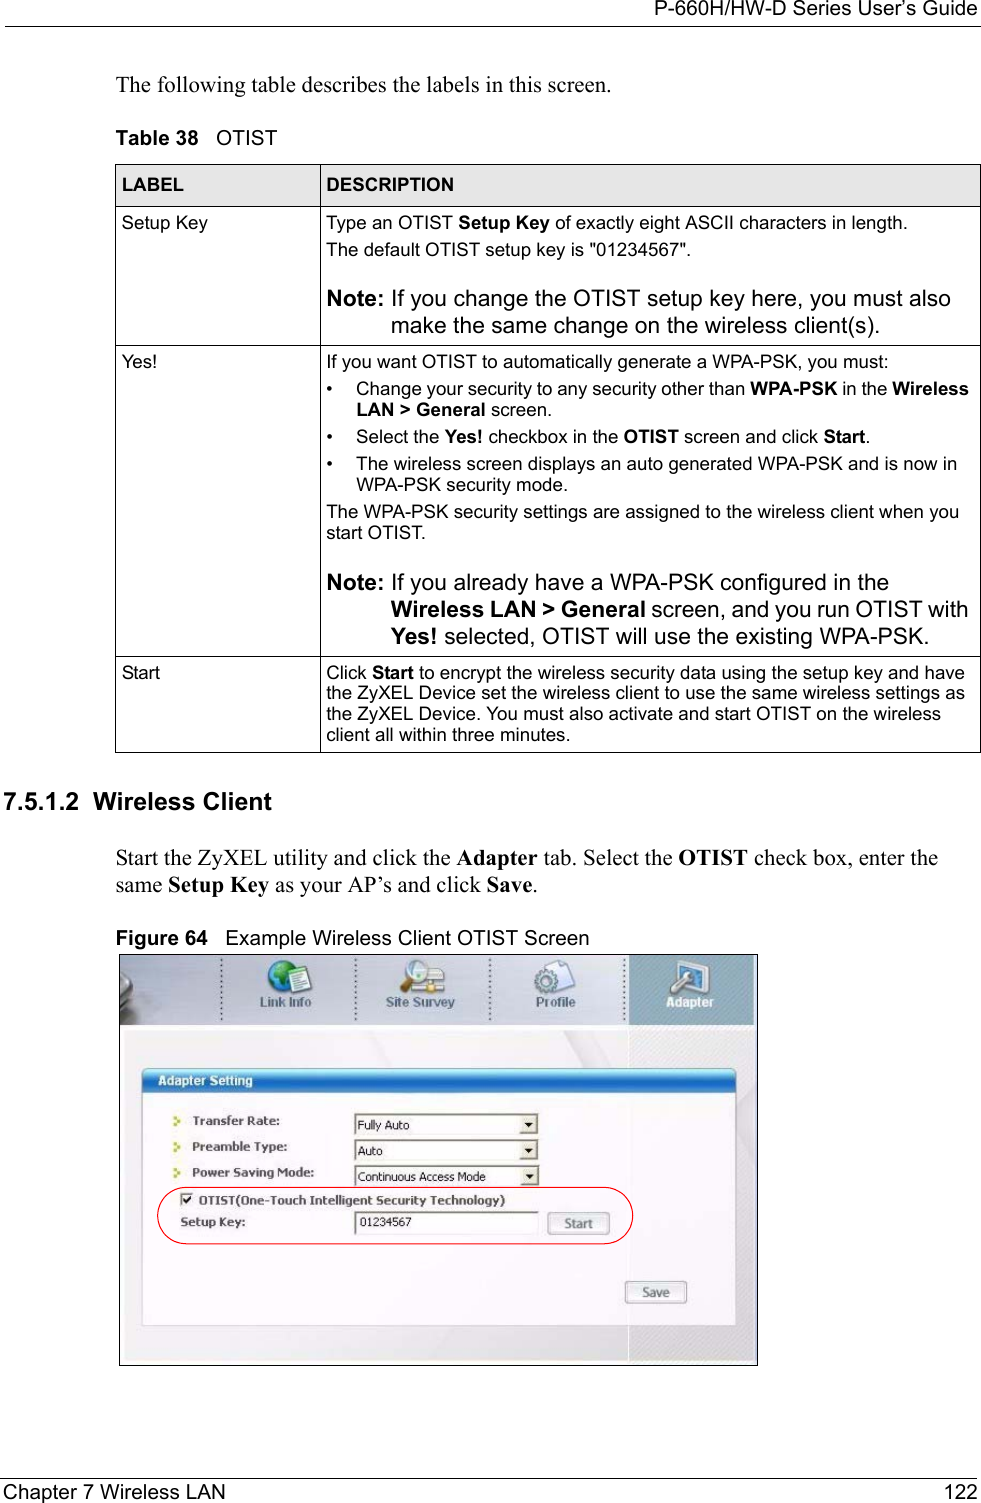 P-660H/HW-D Series User’s GuideChapter 7 Wireless LAN 122The following table describes the labels in this screen.7.5.1.2  Wireless ClientStart the ZyXEL utility and click the Adapter tab. Select the OTIST check box, enter the same Setup Key as your AP’s and click Save.Figure 64   Example Wireless Client OTIST ScreenTable 38   OTISTLABEL DESCRIPTIONSetup Key Type an OTIST Setup Key of exactly eight ASCII characters in length. The default OTIST setup key is &quot;01234567&quot;.Note: If you change the OTIST setup key here, you must also make the same change on the wireless client(s).Yes! If you want OTIST to automatically generate a WPA-PSK, you must:• Change your security to any security other than WPA-PSK in the Wireless LAN &gt; General screen.• Select the Yes! checkbox in the OTIST screen and click Start.• The wireless screen displays an auto generated WPA-PSK and is now in WPA-PSK security mode. The WPA-PSK security settings are assigned to the wireless client when you start OTIST.Note: If you already have a WPA-PSK configured in the Wireless LAN &gt; General screen, and you run OTIST with Yes! selected, OTIST will use the existing WPA-PSK.Start Click Start to encrypt the wireless security data using the setup key and have the ZyXEL Device set the wireless client to use the same wireless settings as the ZyXEL Device. You must also activate and start OTIST on the wireless client all within three minutes.